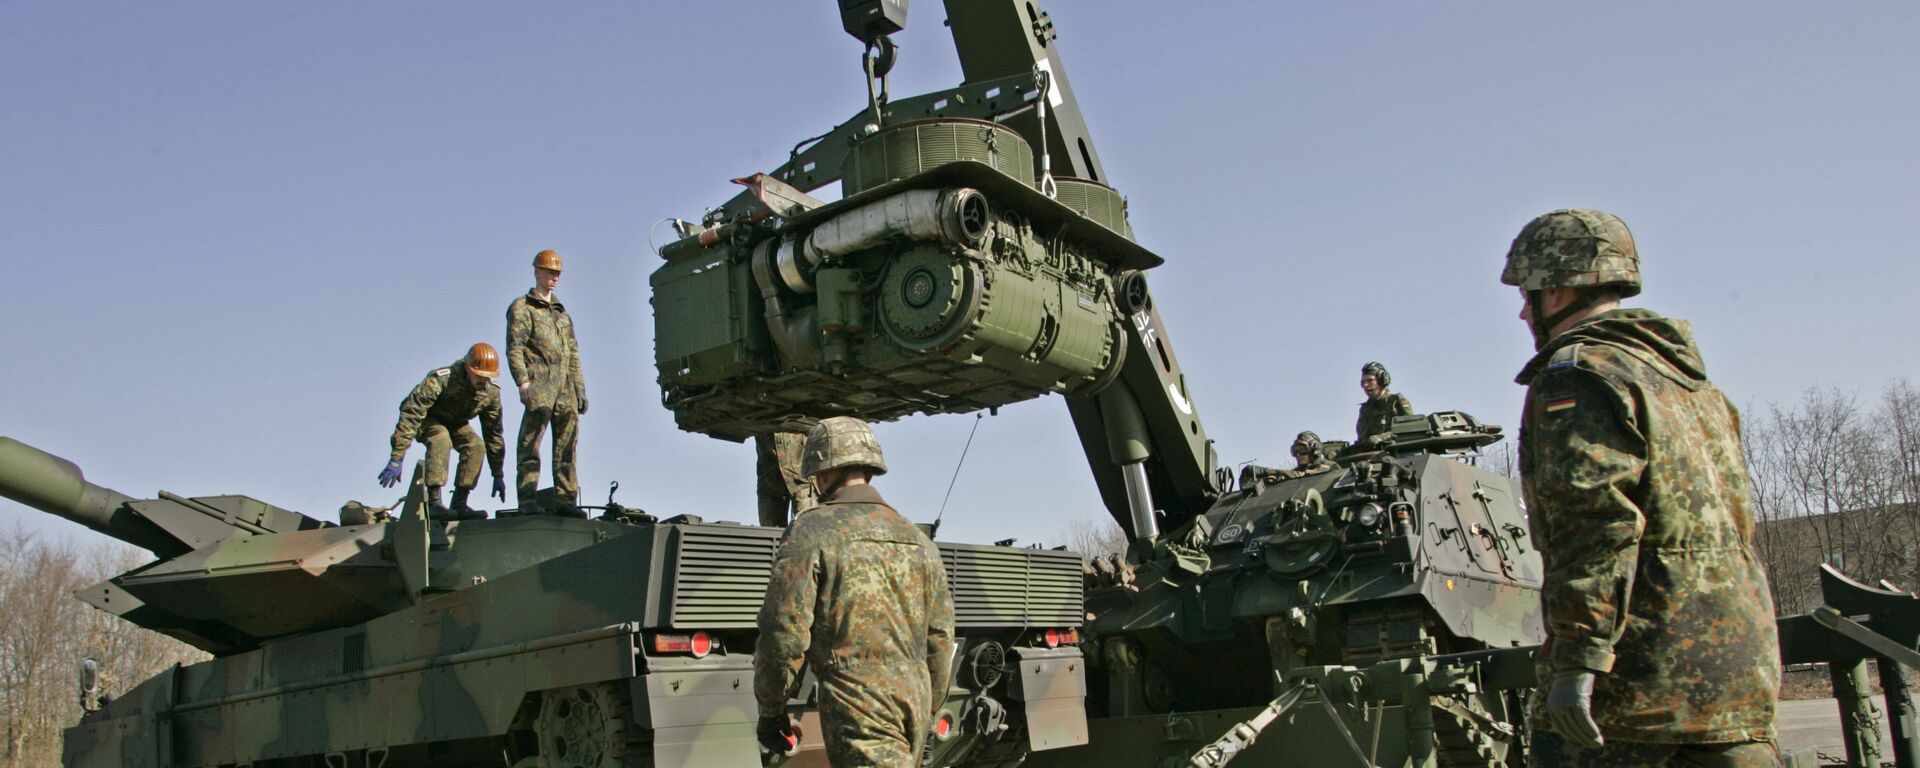 The crew of a 'Buffalo' wrecker tank, right, of the German Army lifts the engine of a Leopard 2 battle tank, left, for repair during a demonstration at the Bayern Barracks in Munich, southern Germany, on Wednesday, Feb. 20, 2008 - Sputnik International, 1920, 01.05.2022